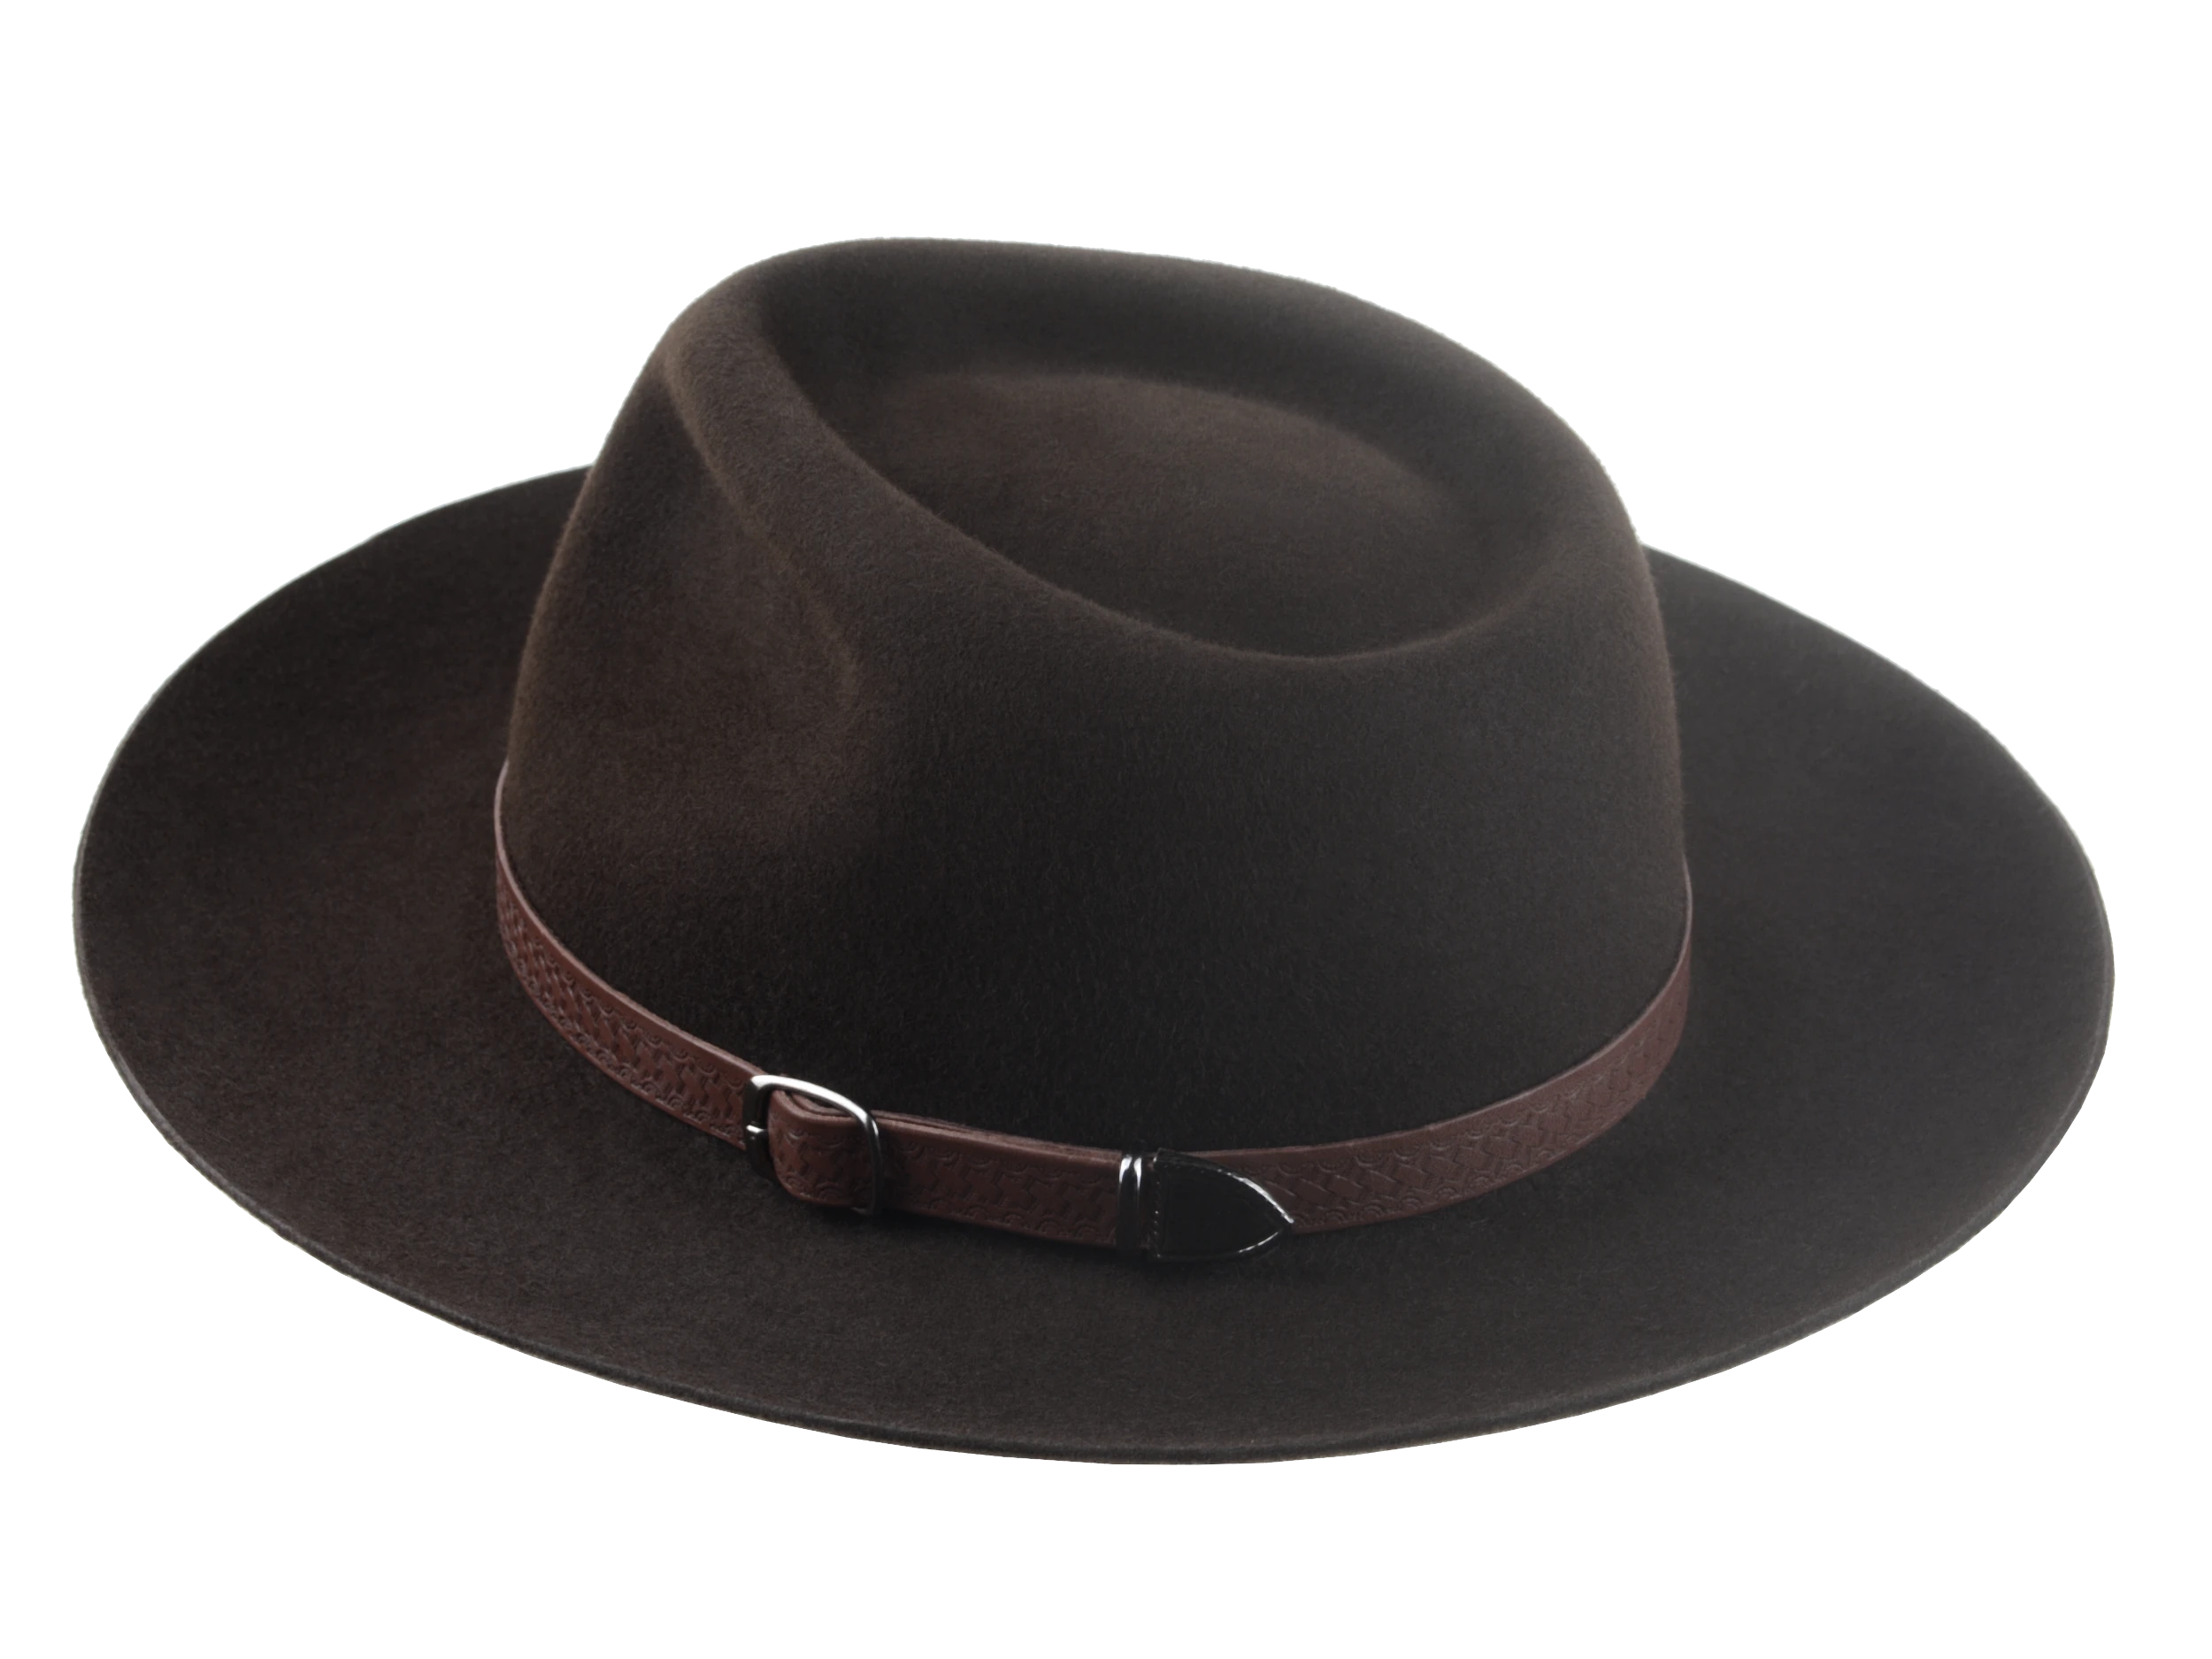 The Magnet: Showcasing the hat's sturdy construction and refined stitching | Agnoulita Hats